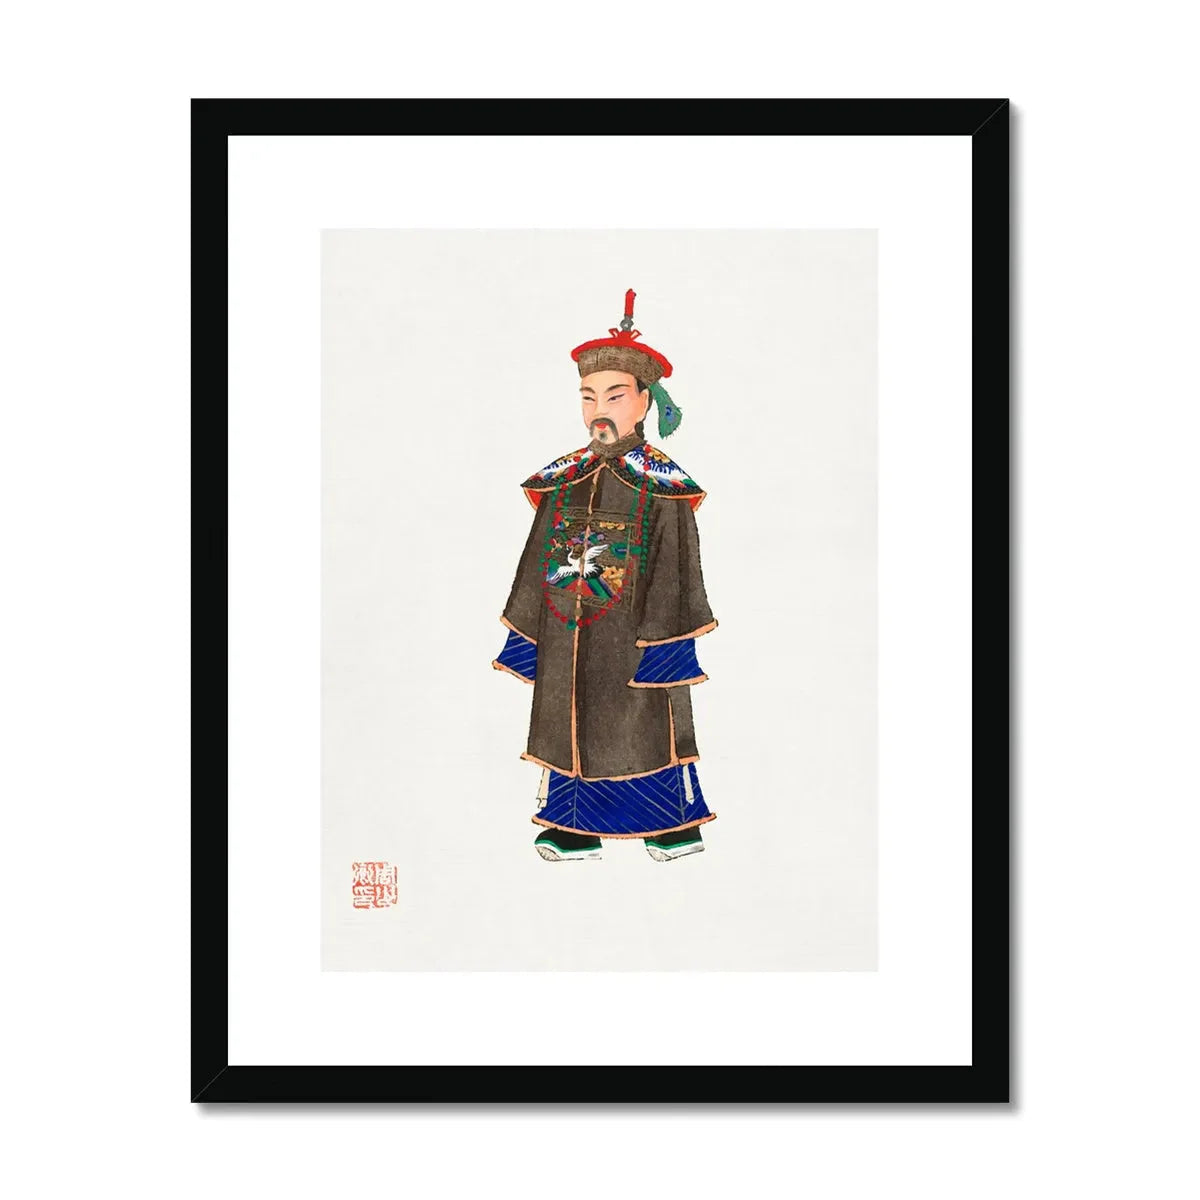 Chinese Nobleman At Court Framed & Mounted Print - 16’x20’ / Black Frame - Posters Prints & Visual Artwork